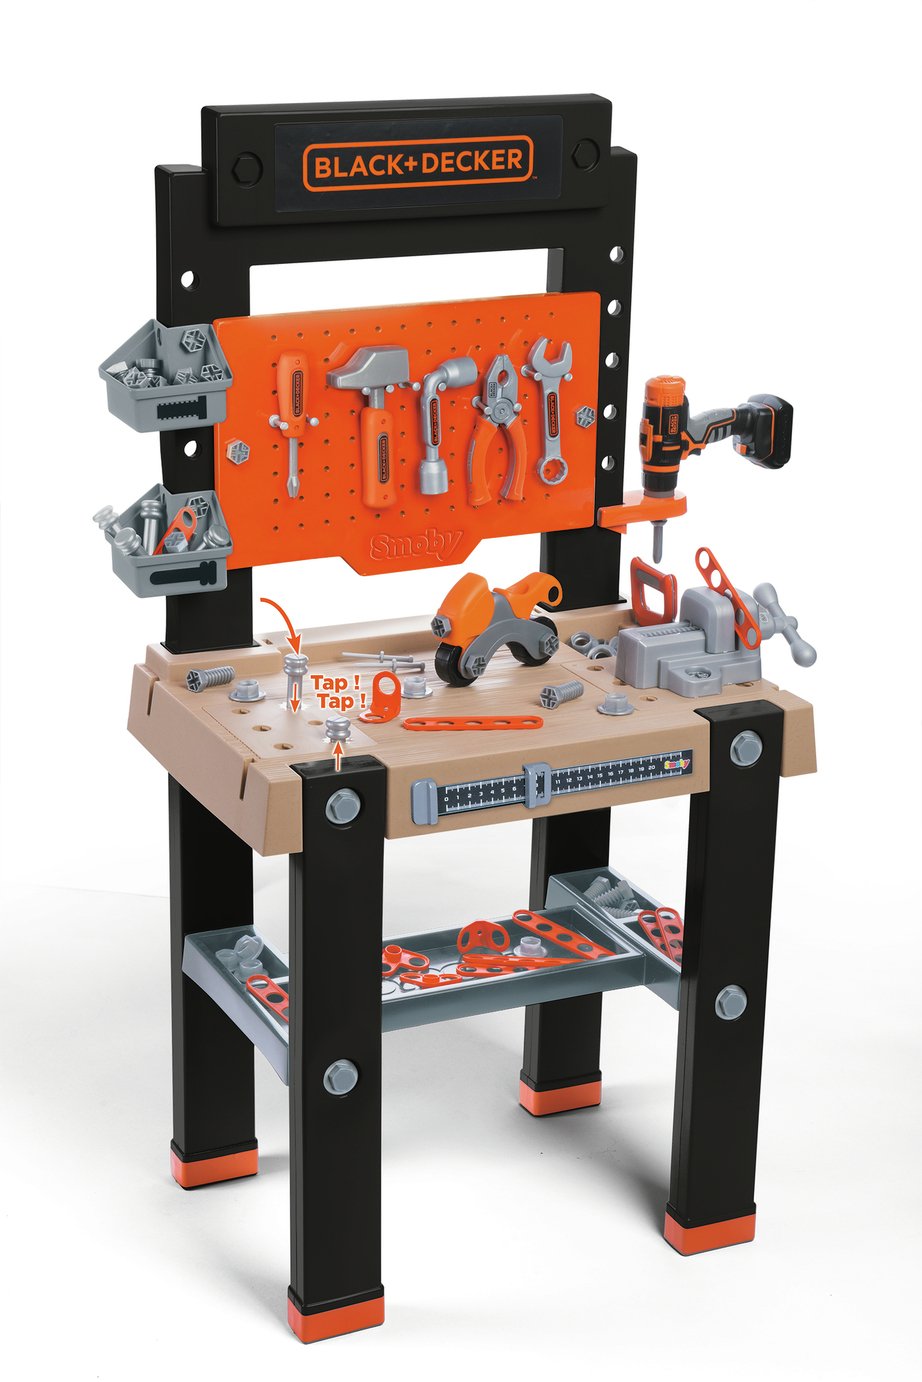 Smoby Giant Black and Decker Toy Workbench Review